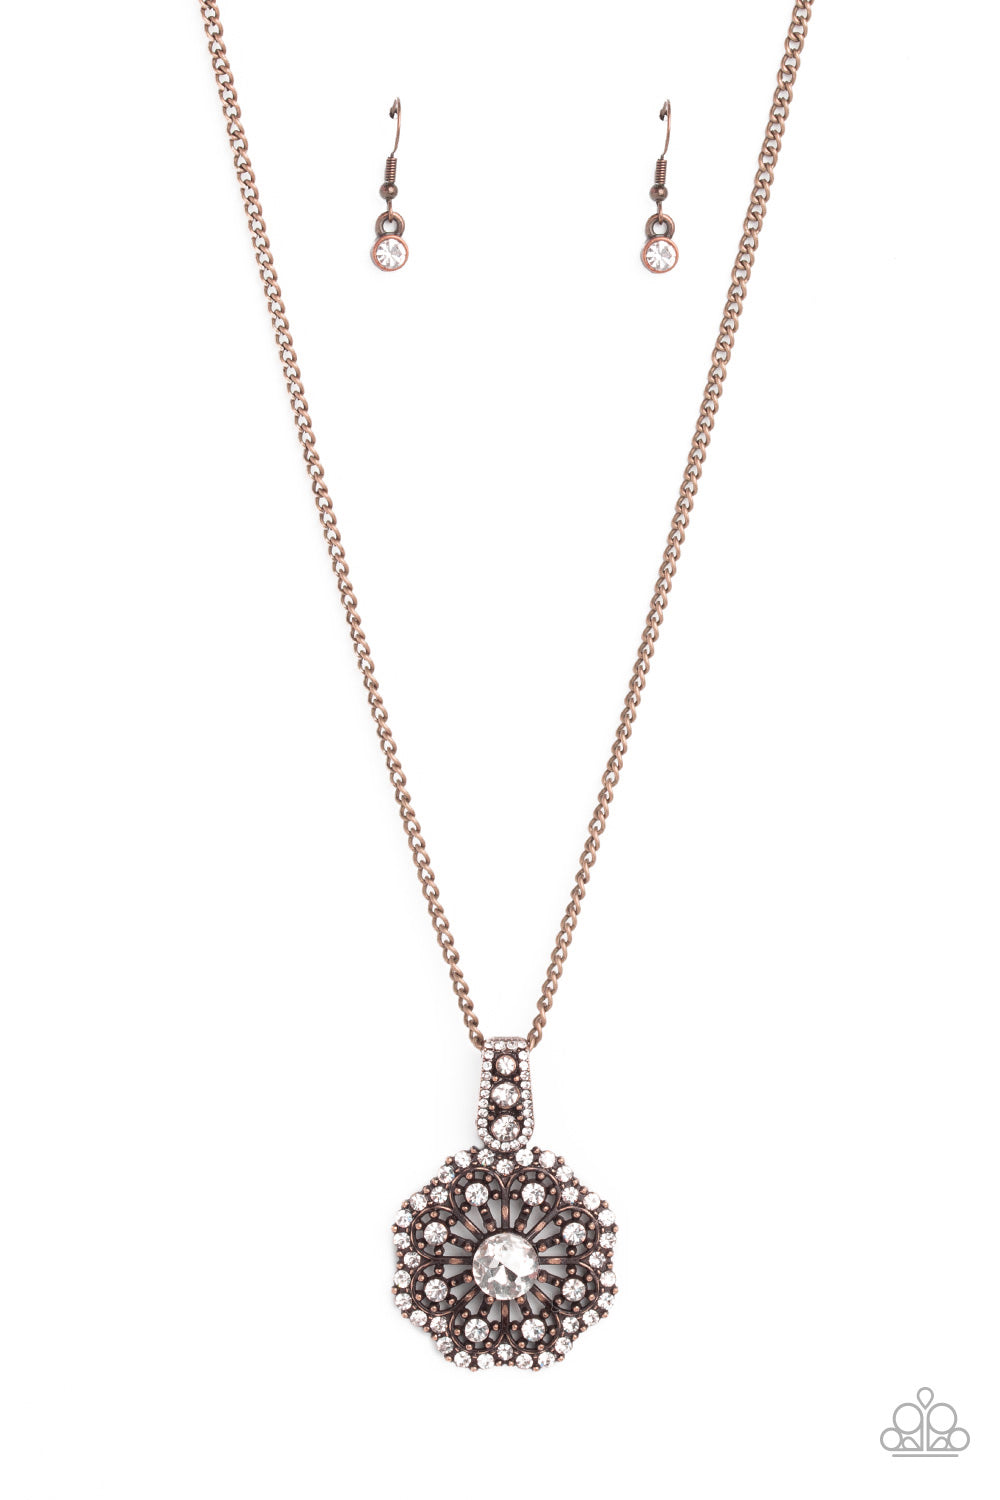 Paparazzi - Bewitching Brilliance - Copper Necklace